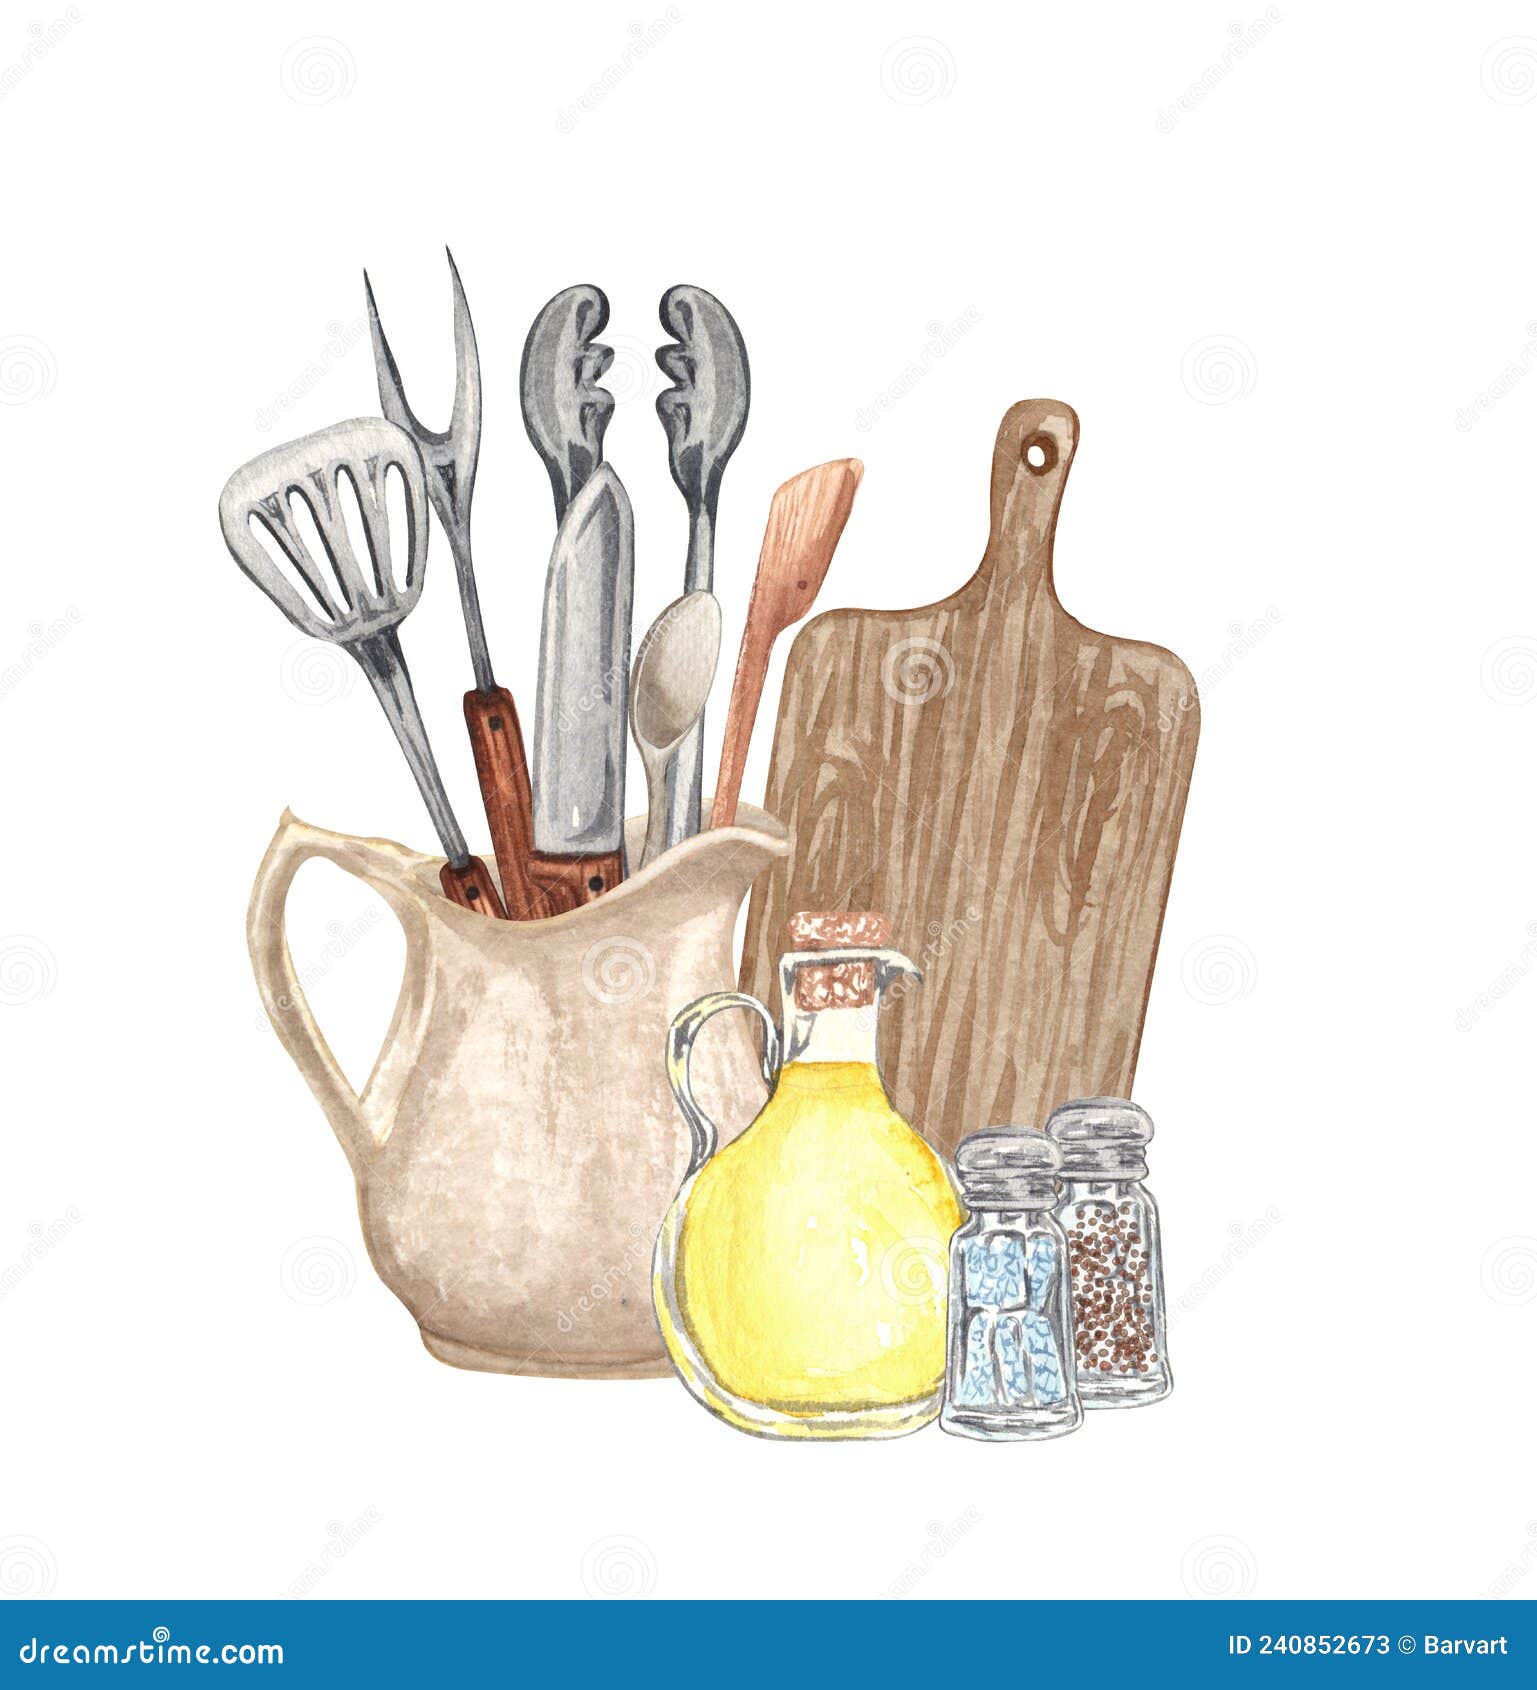 https://thumbs.dreamstime.com/z/watercolor-kitchen-utensils-clay-jag-hand-drawn-cooking-clipart-baking-concept-barbecue-watercolor-kitchen-utensils-clay-240852673.jpg